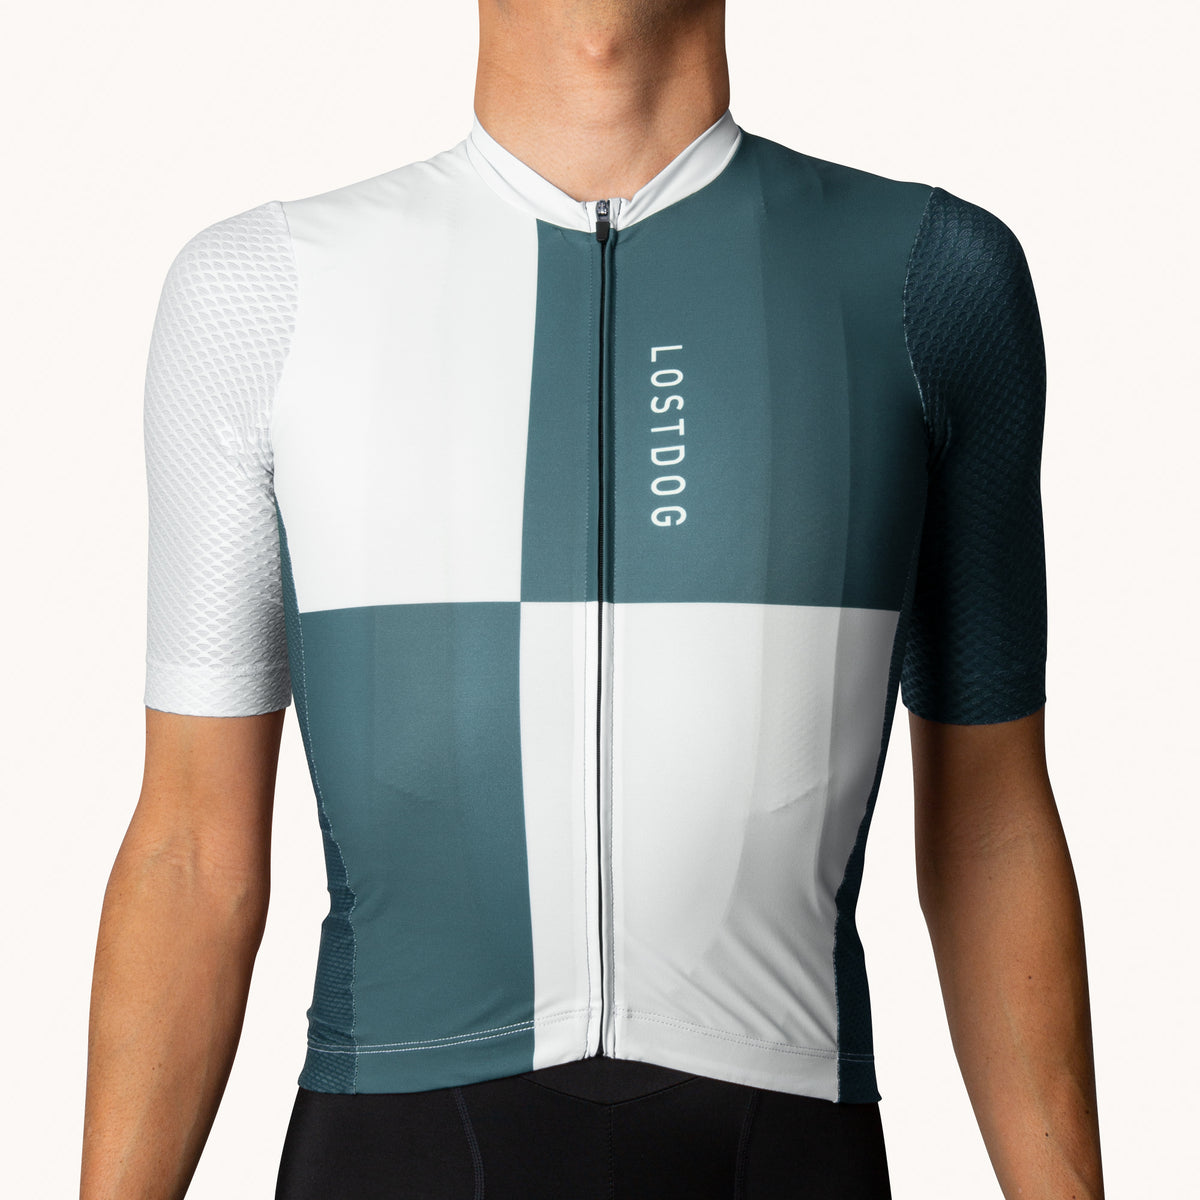 Men's Chequered Range Jersey – Lost Dog Cycling